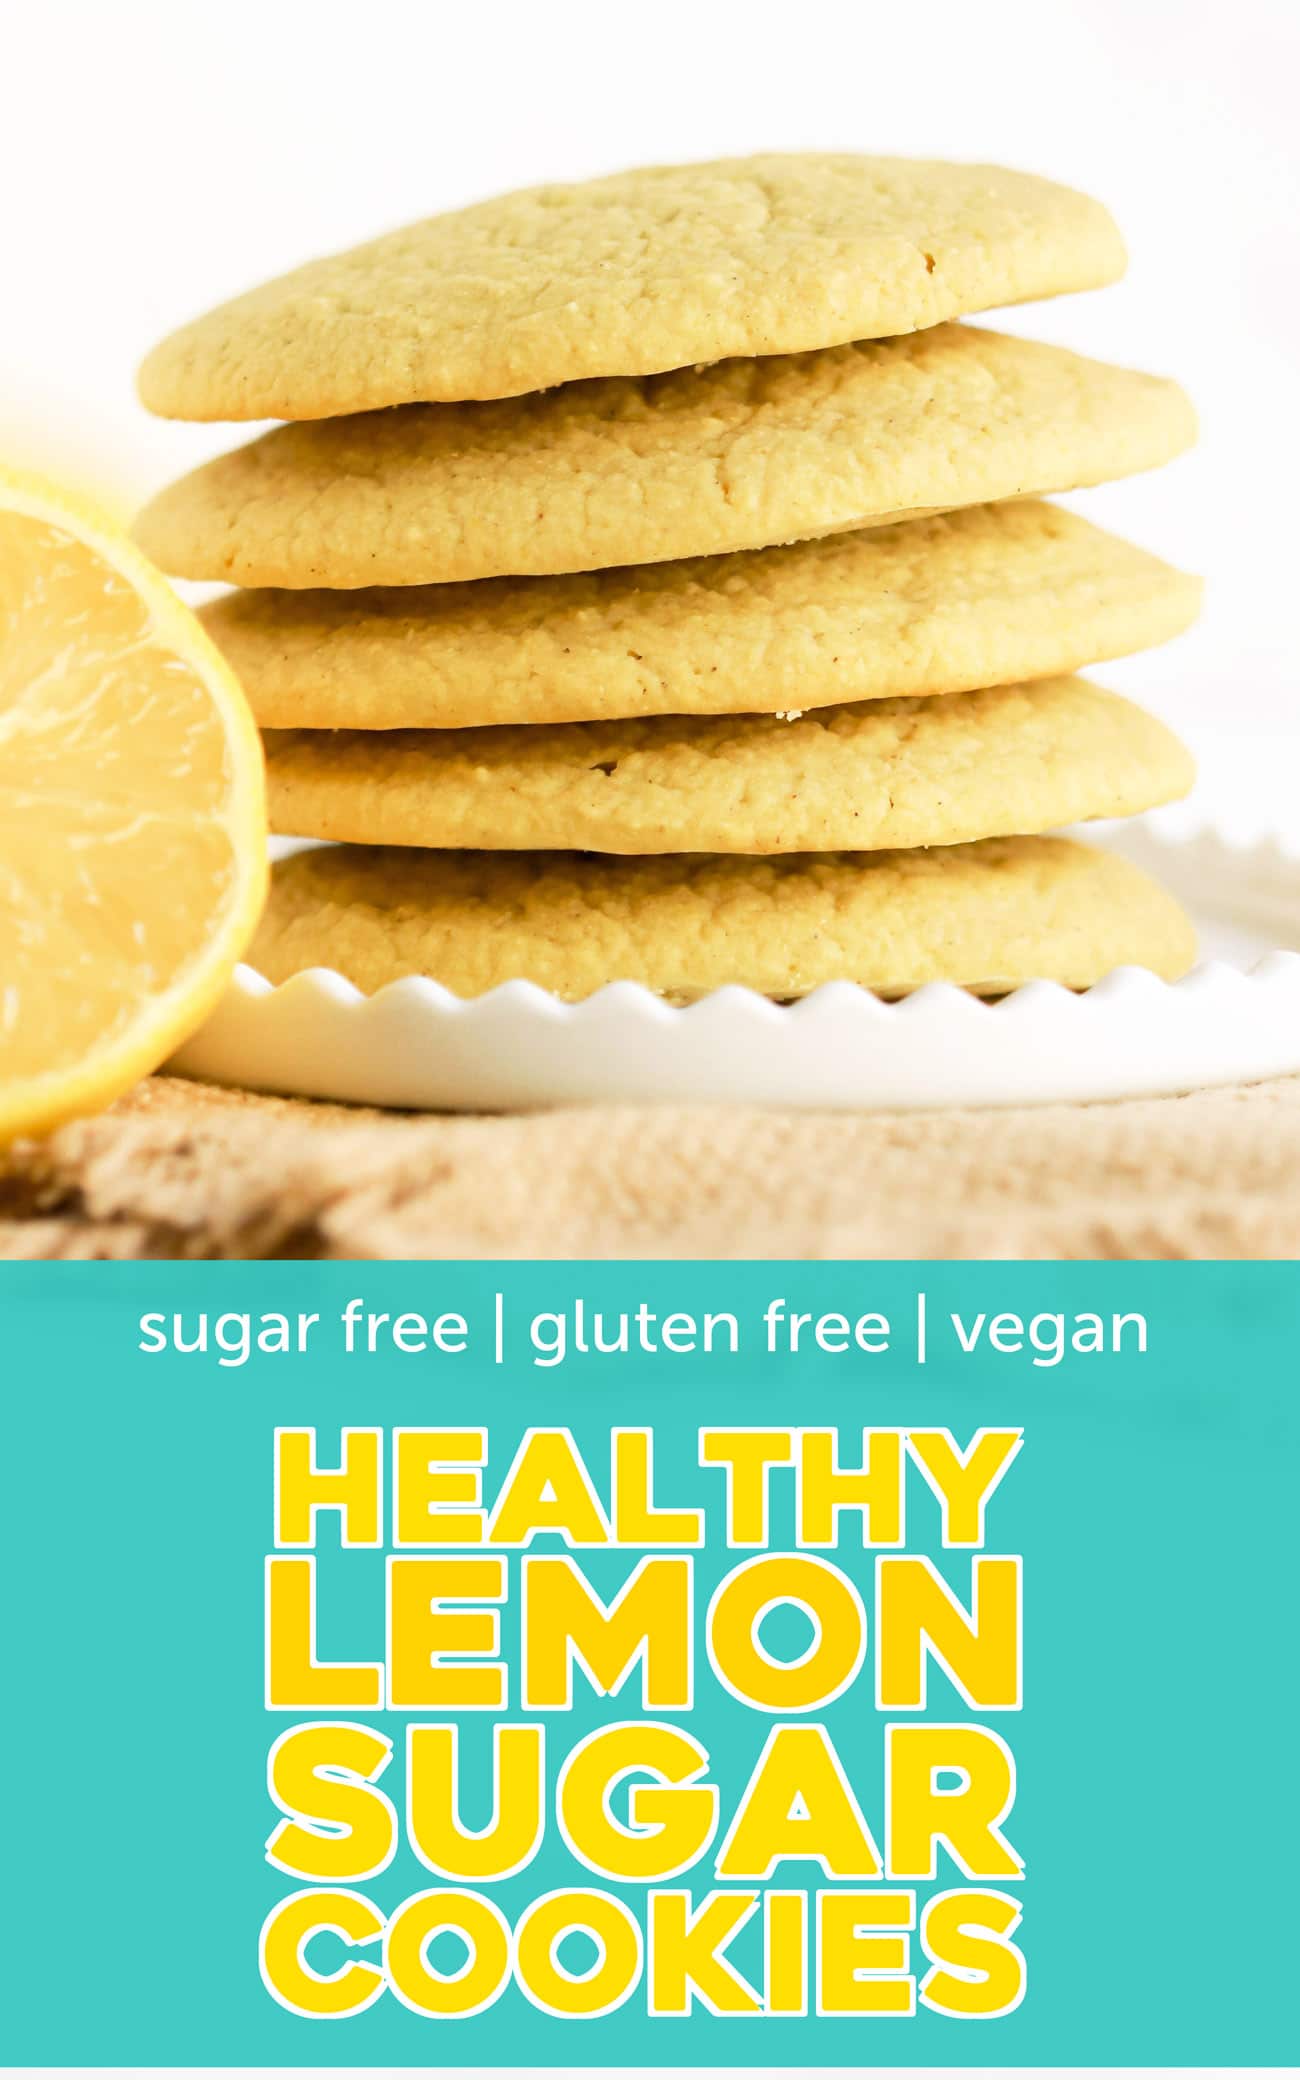 These Lemon Sugar Cookies are packed with bright and refreshing lemon flavor -- no need for the butter, sugar, or flour! Yes, these cookies are dairy free, sugar free, and gluten free. Perfect for the lemon lovers out there! Can you guess the secret ingredient that makes them uber soft?